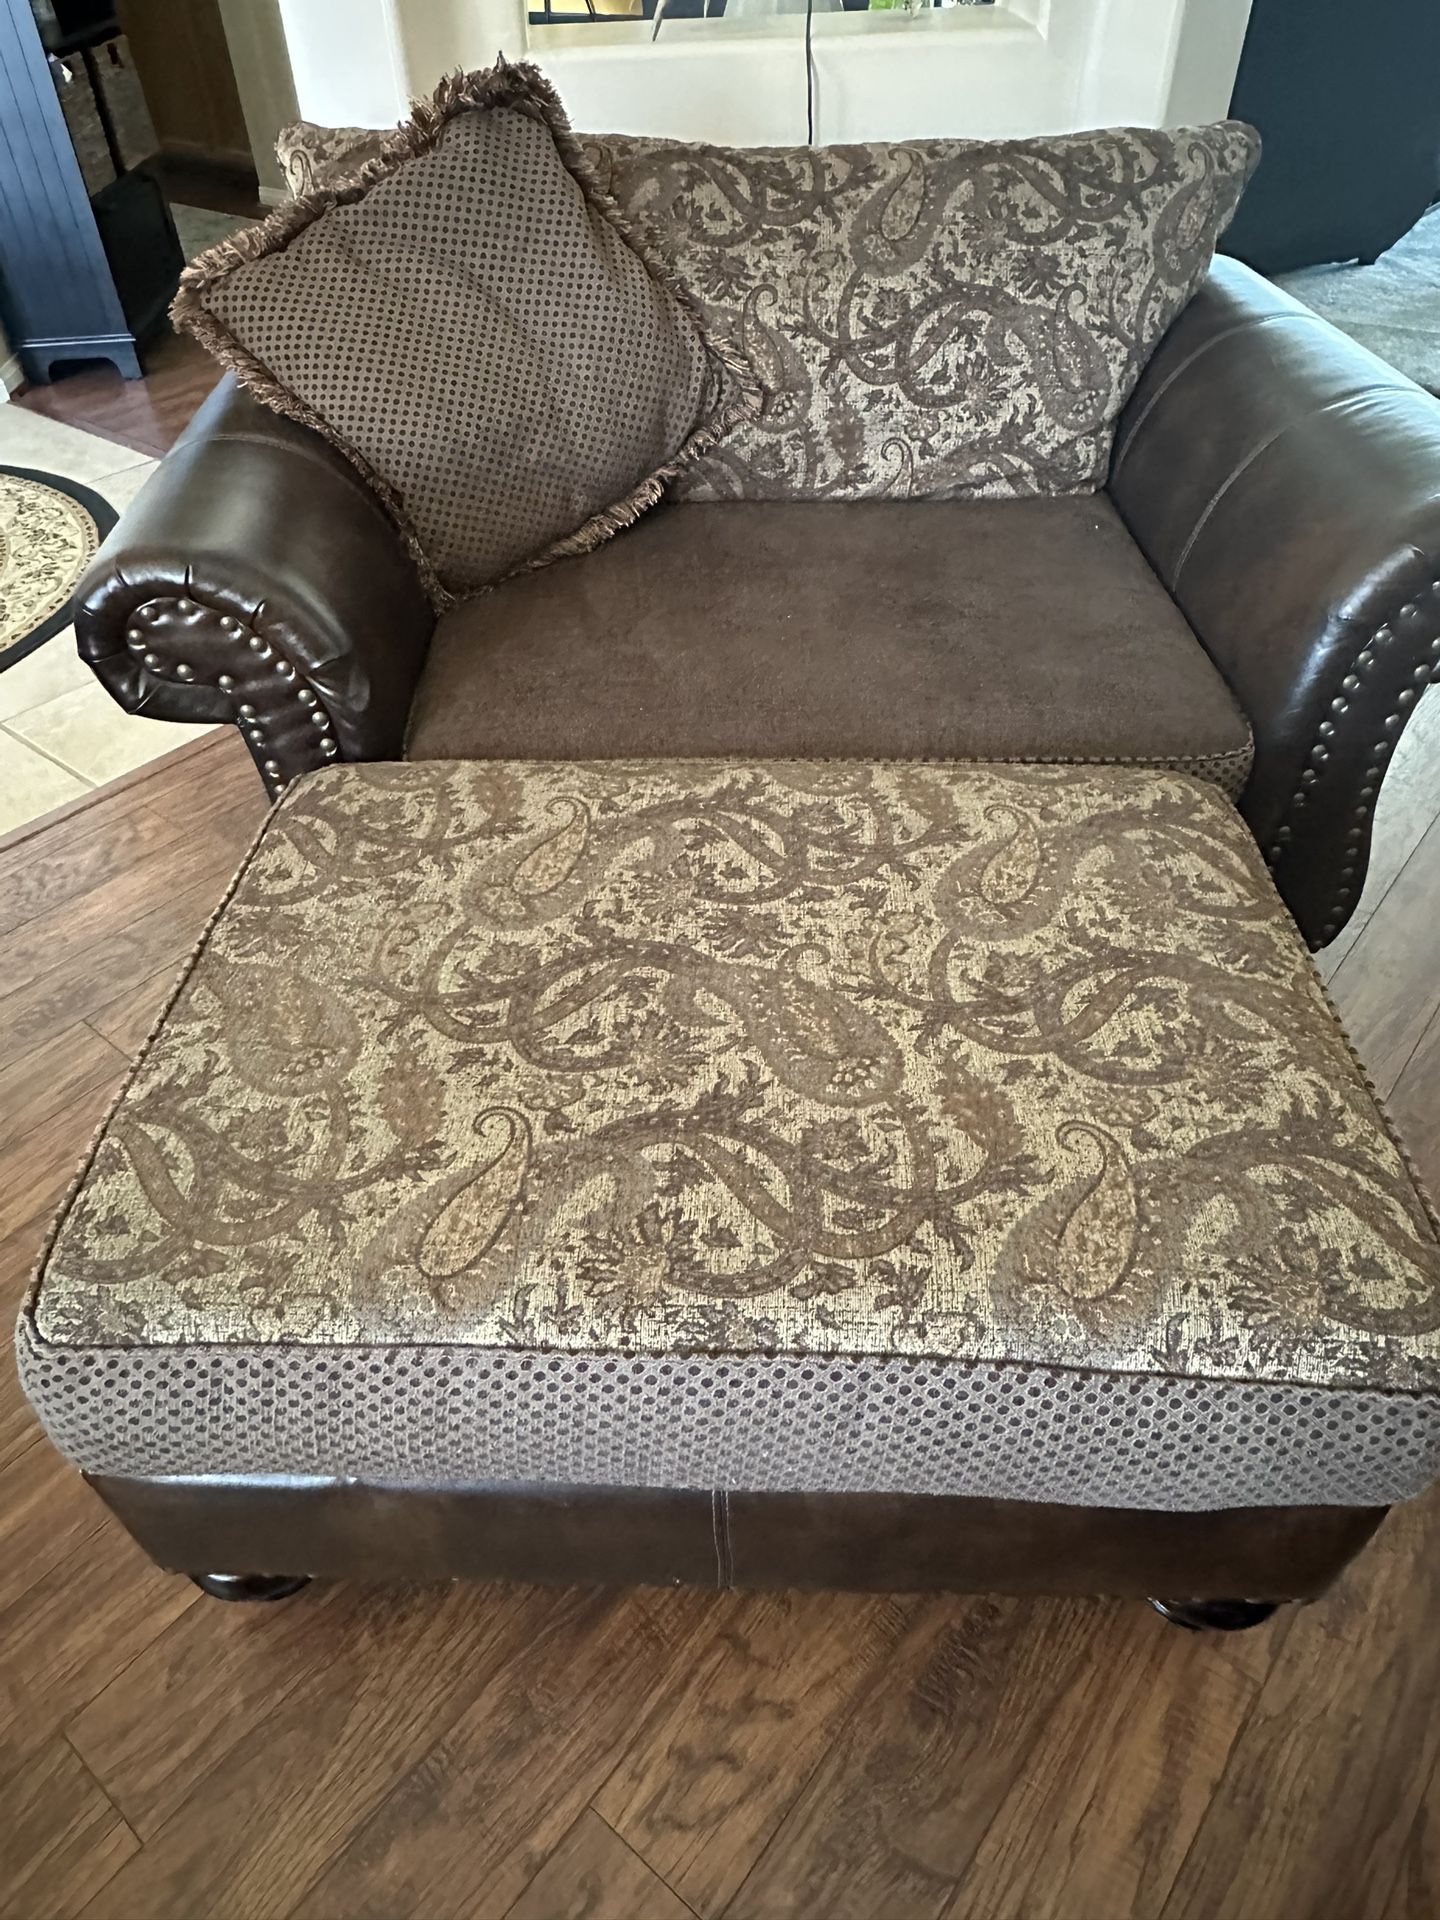 Oversized Chair With Ottoman 